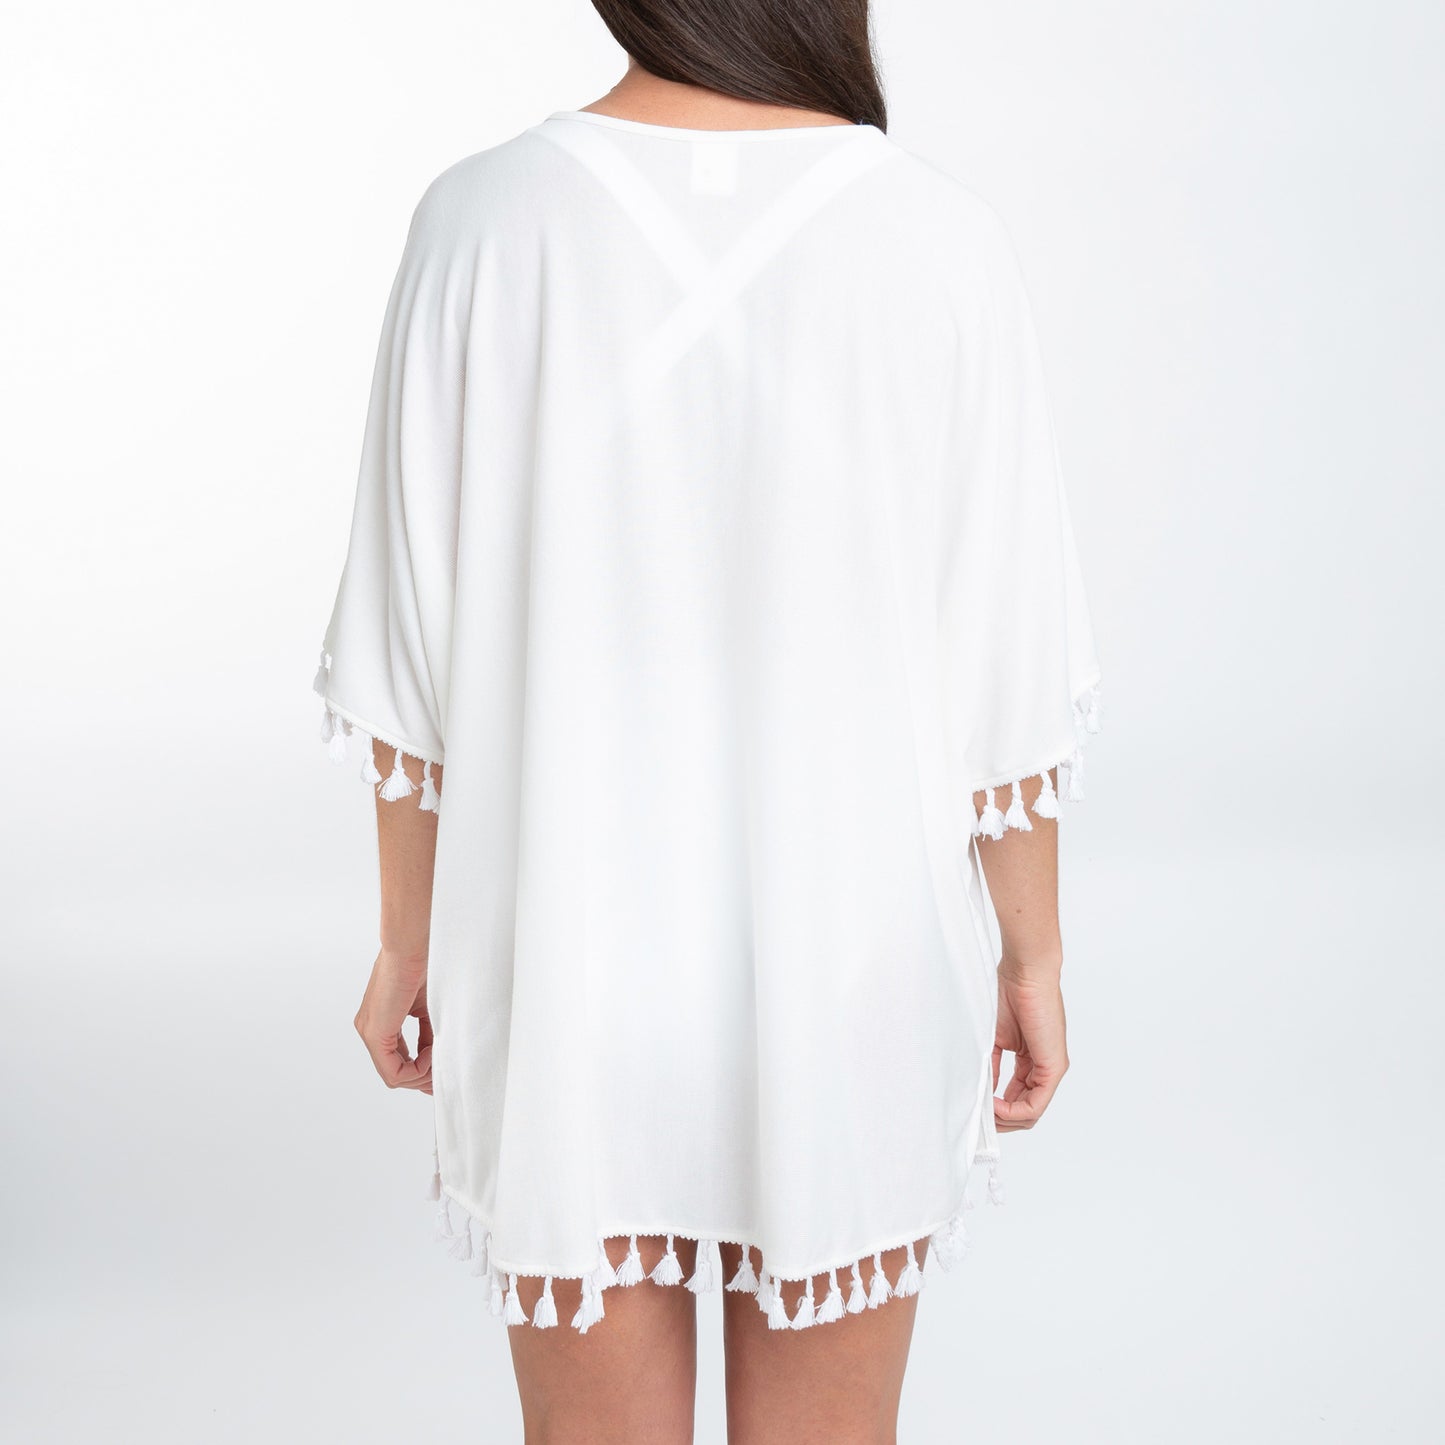 Elsie White Jersey One Size Beach Swimsuit Cover Up